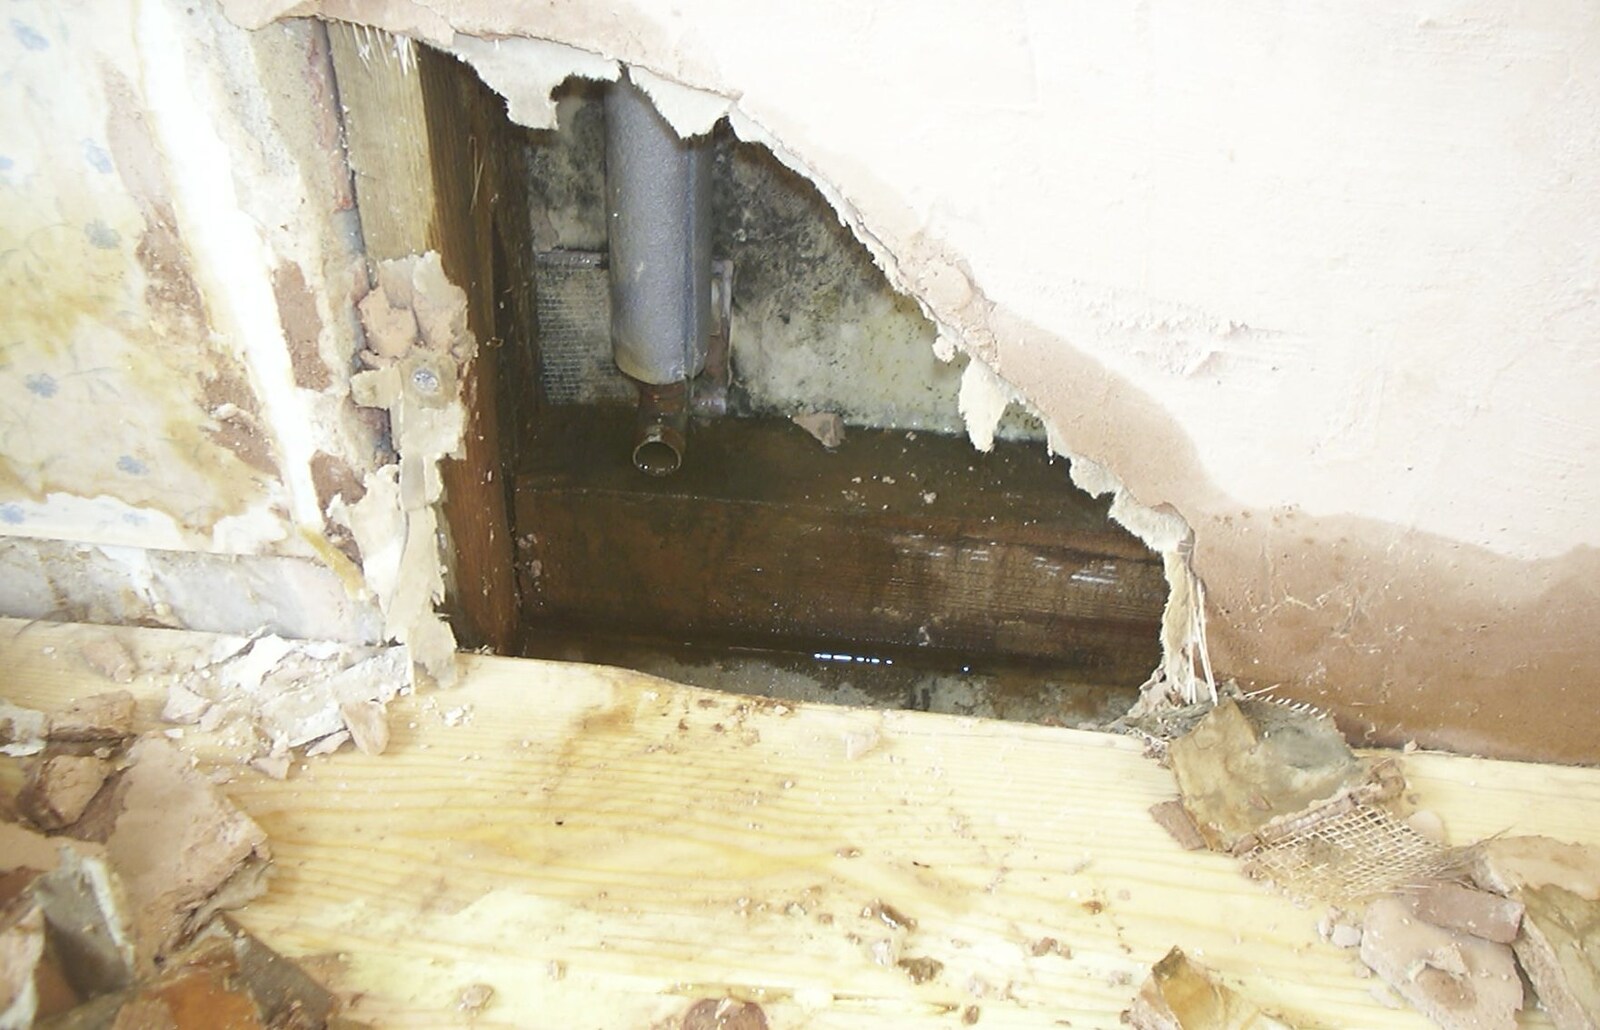 A radiator has been secretly leaking from Bathroom Rebuilding, Brome, Suffolk - 1st February 2002